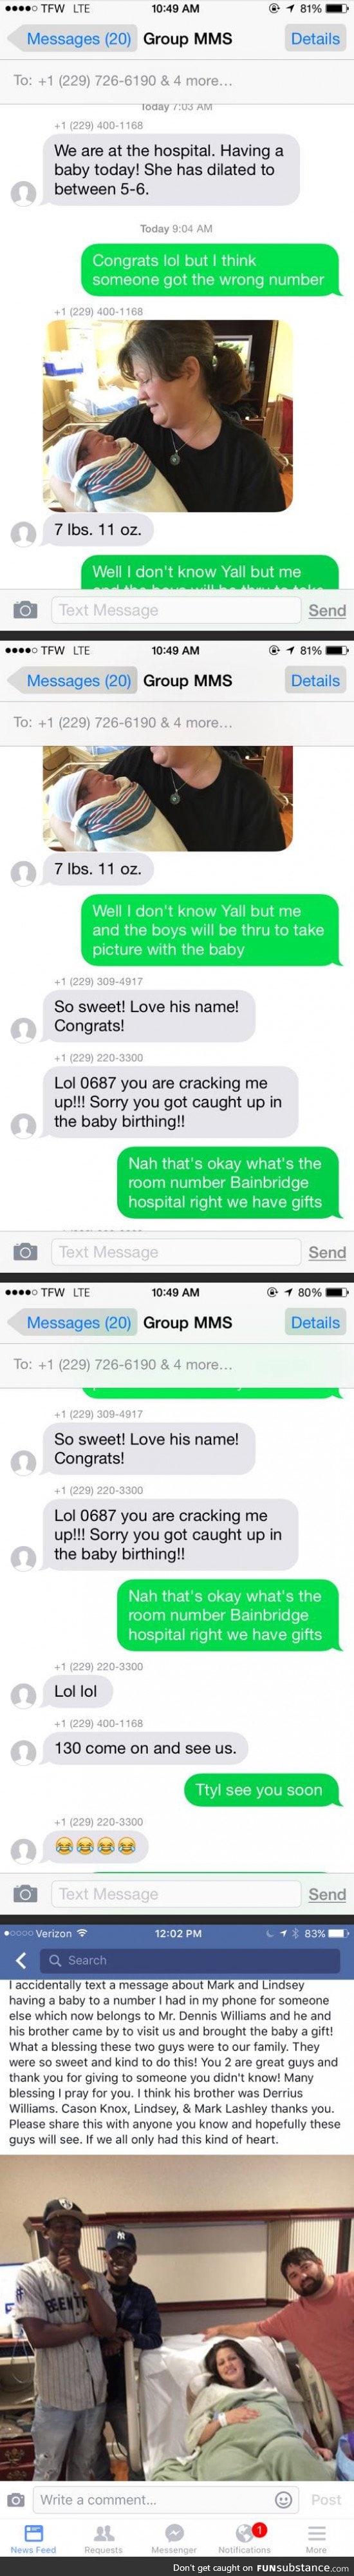 Texting the wrong number goes right